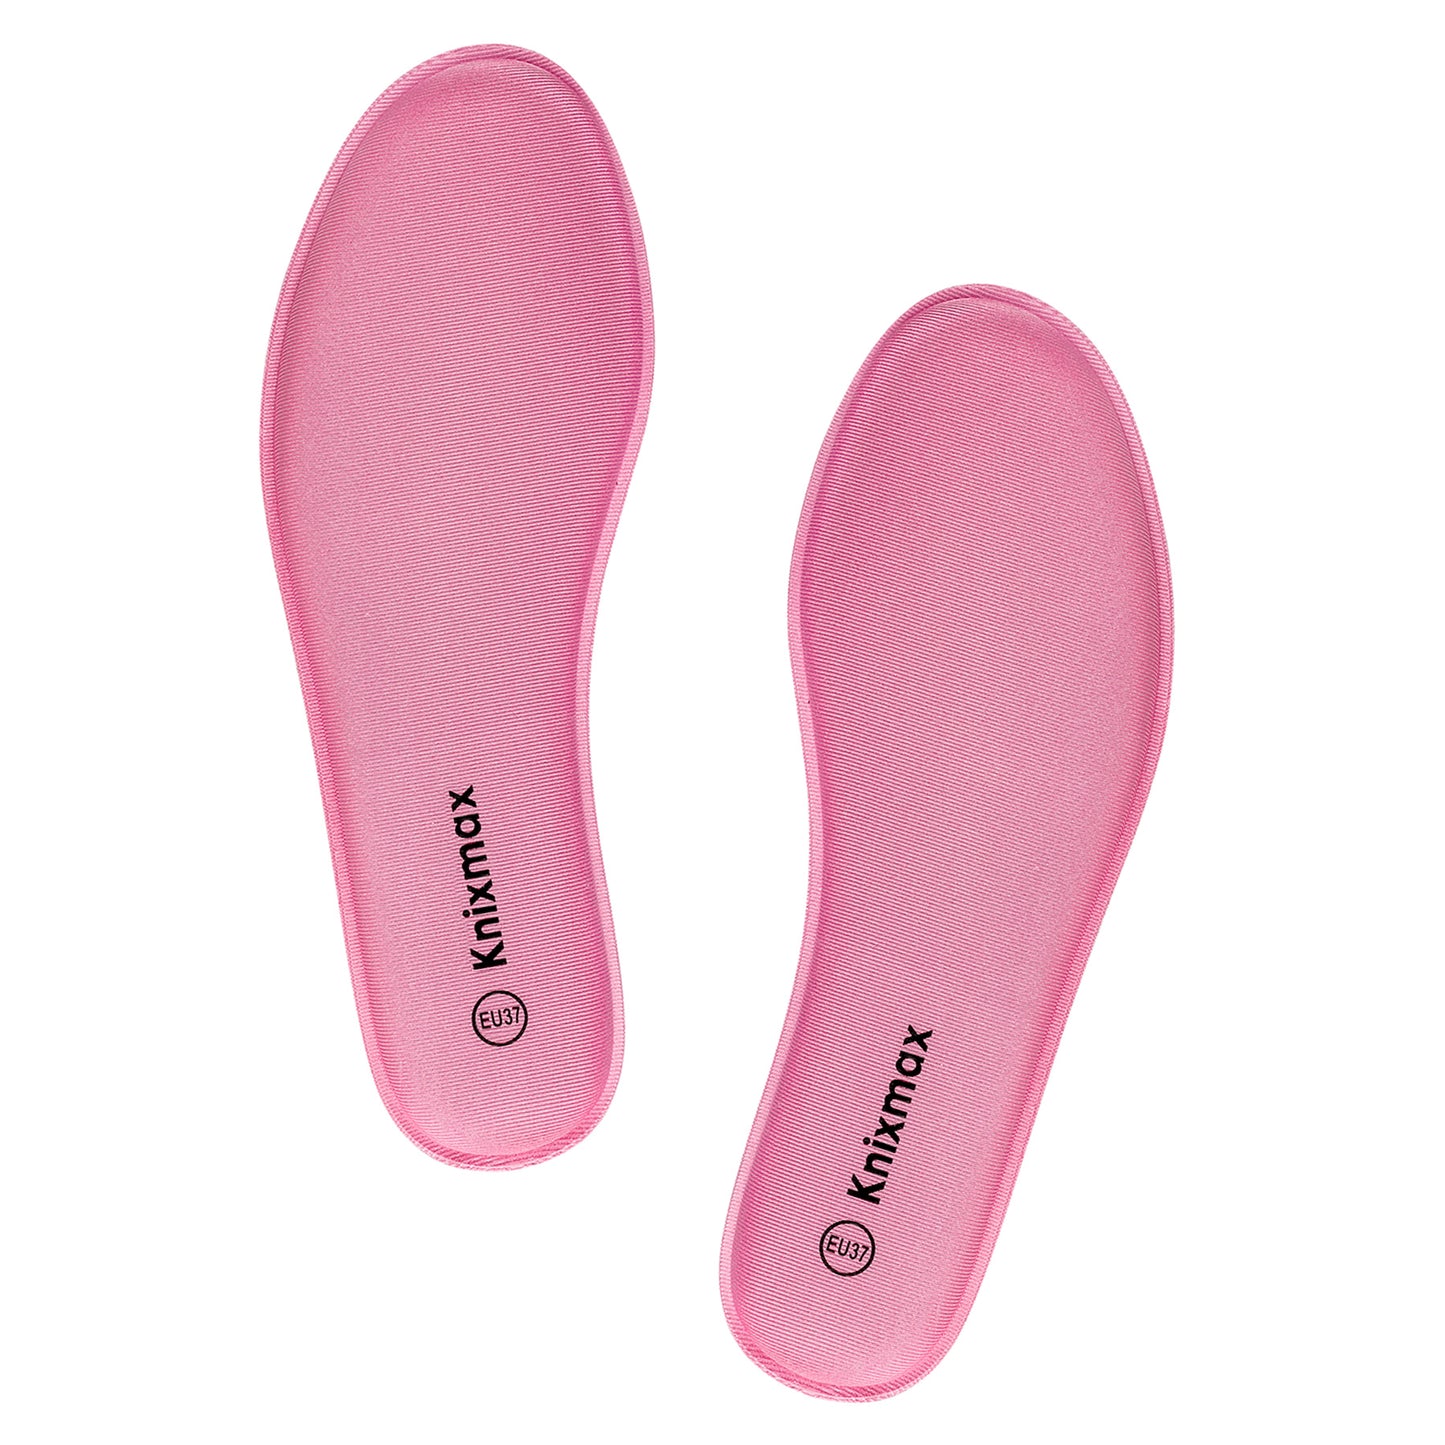 Knixmax Women's Memory Foam Insoles, Pink, for Athletic Shoes & Sneakers